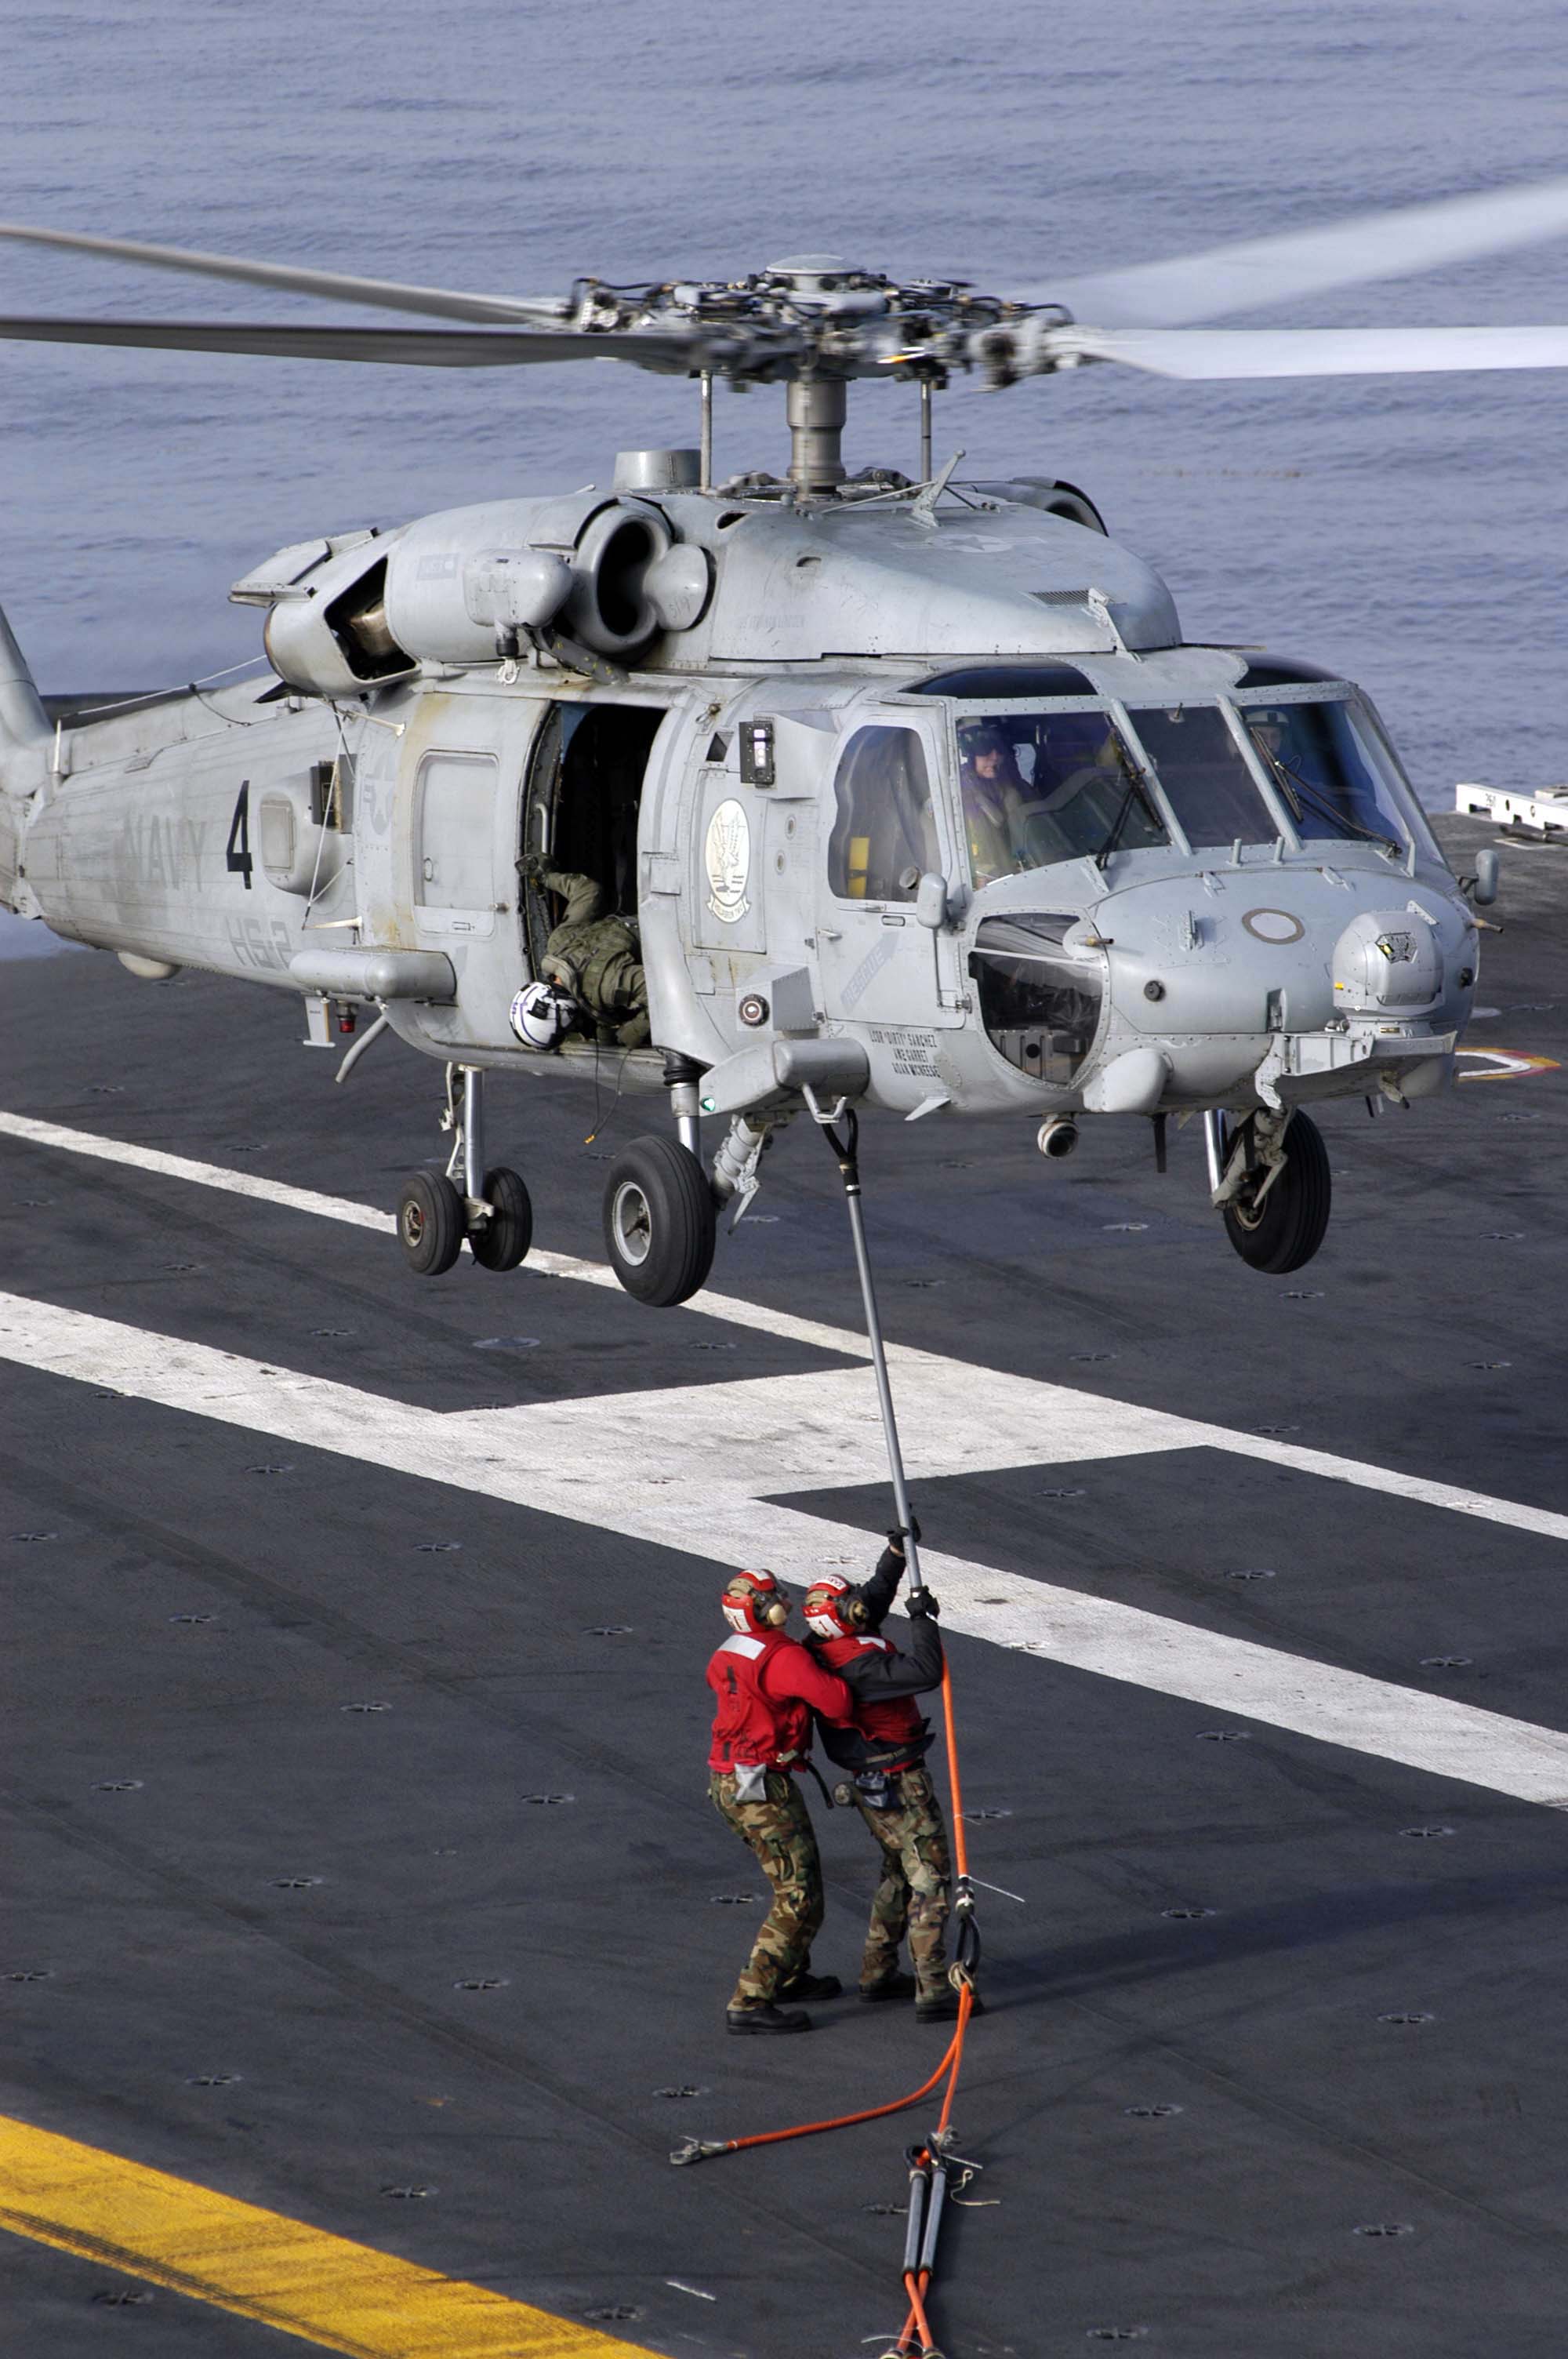 US Navy 040825-N-9228K-015 Two Aviation Ordnancemen assigned to G-1 Weapons division aboard the aircraft carrier USS Abraham Lincoln (CVN 72) attach sling load assemblies to an HH-60H Seahawk